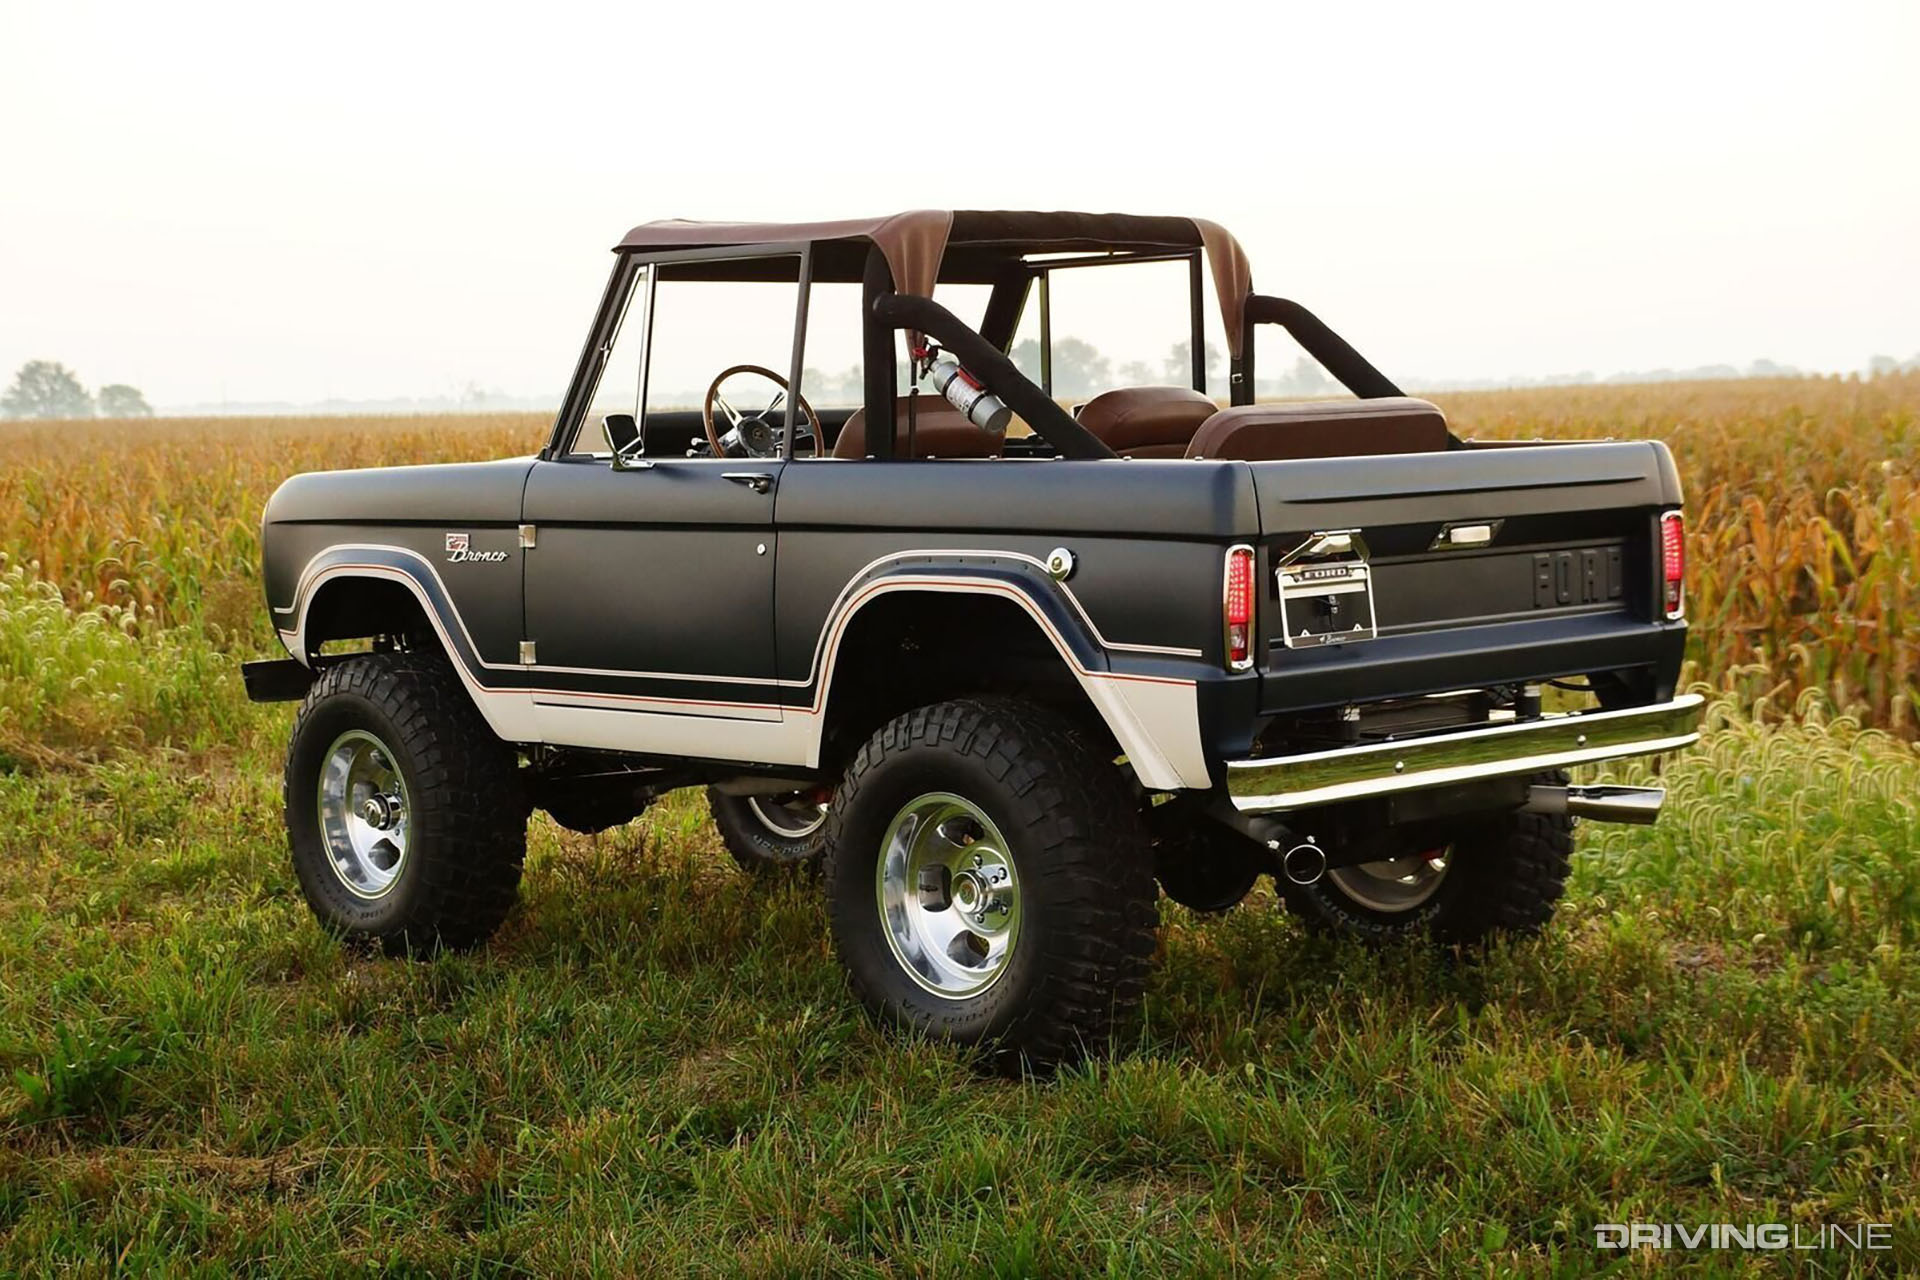 Want a New First-Gen Bronco? Gateway Has You Covered ...